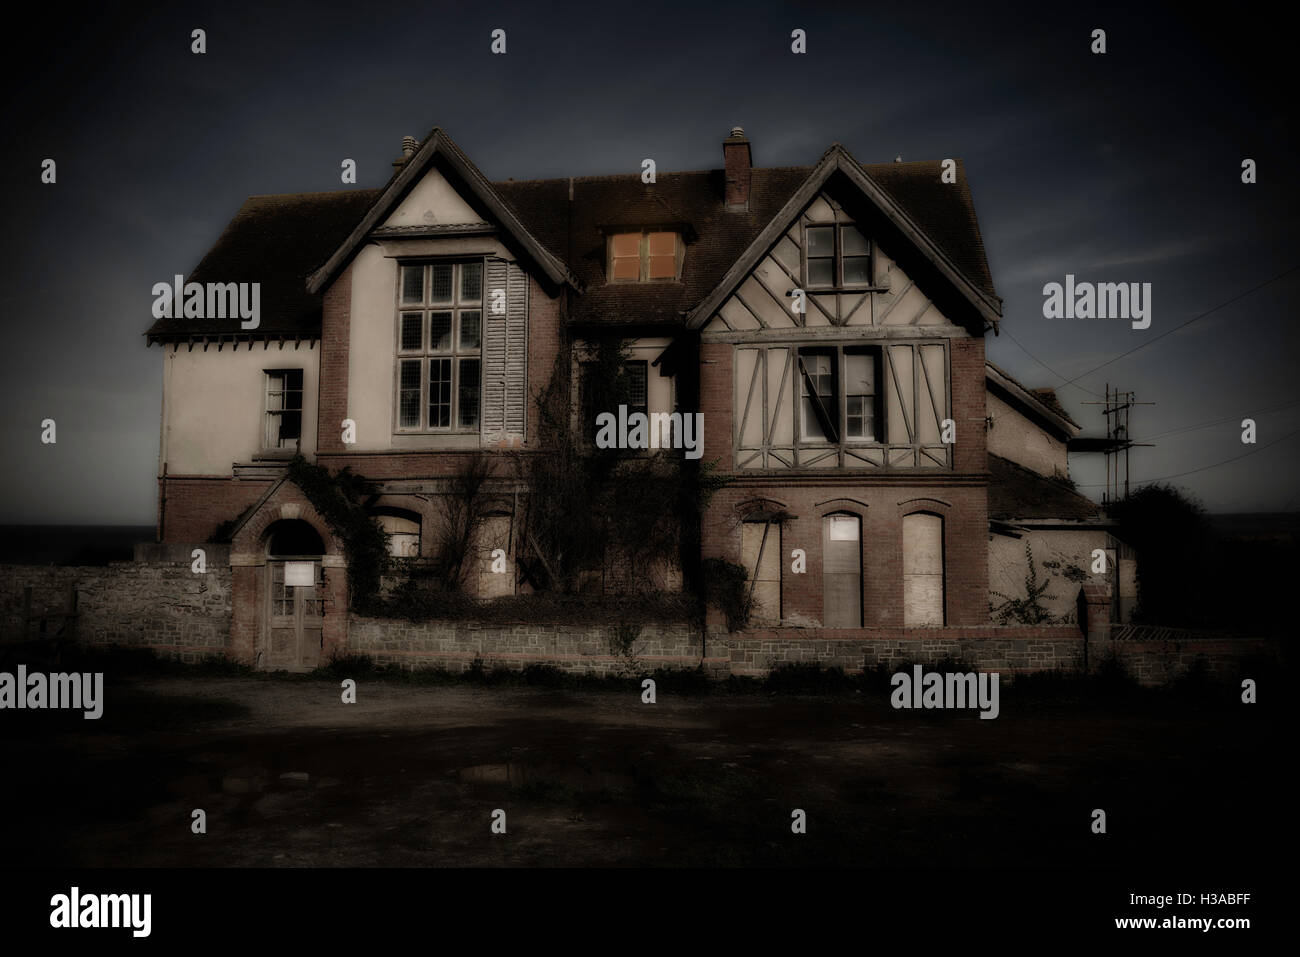 A creepy derelict and haunted looking house Stock Photo